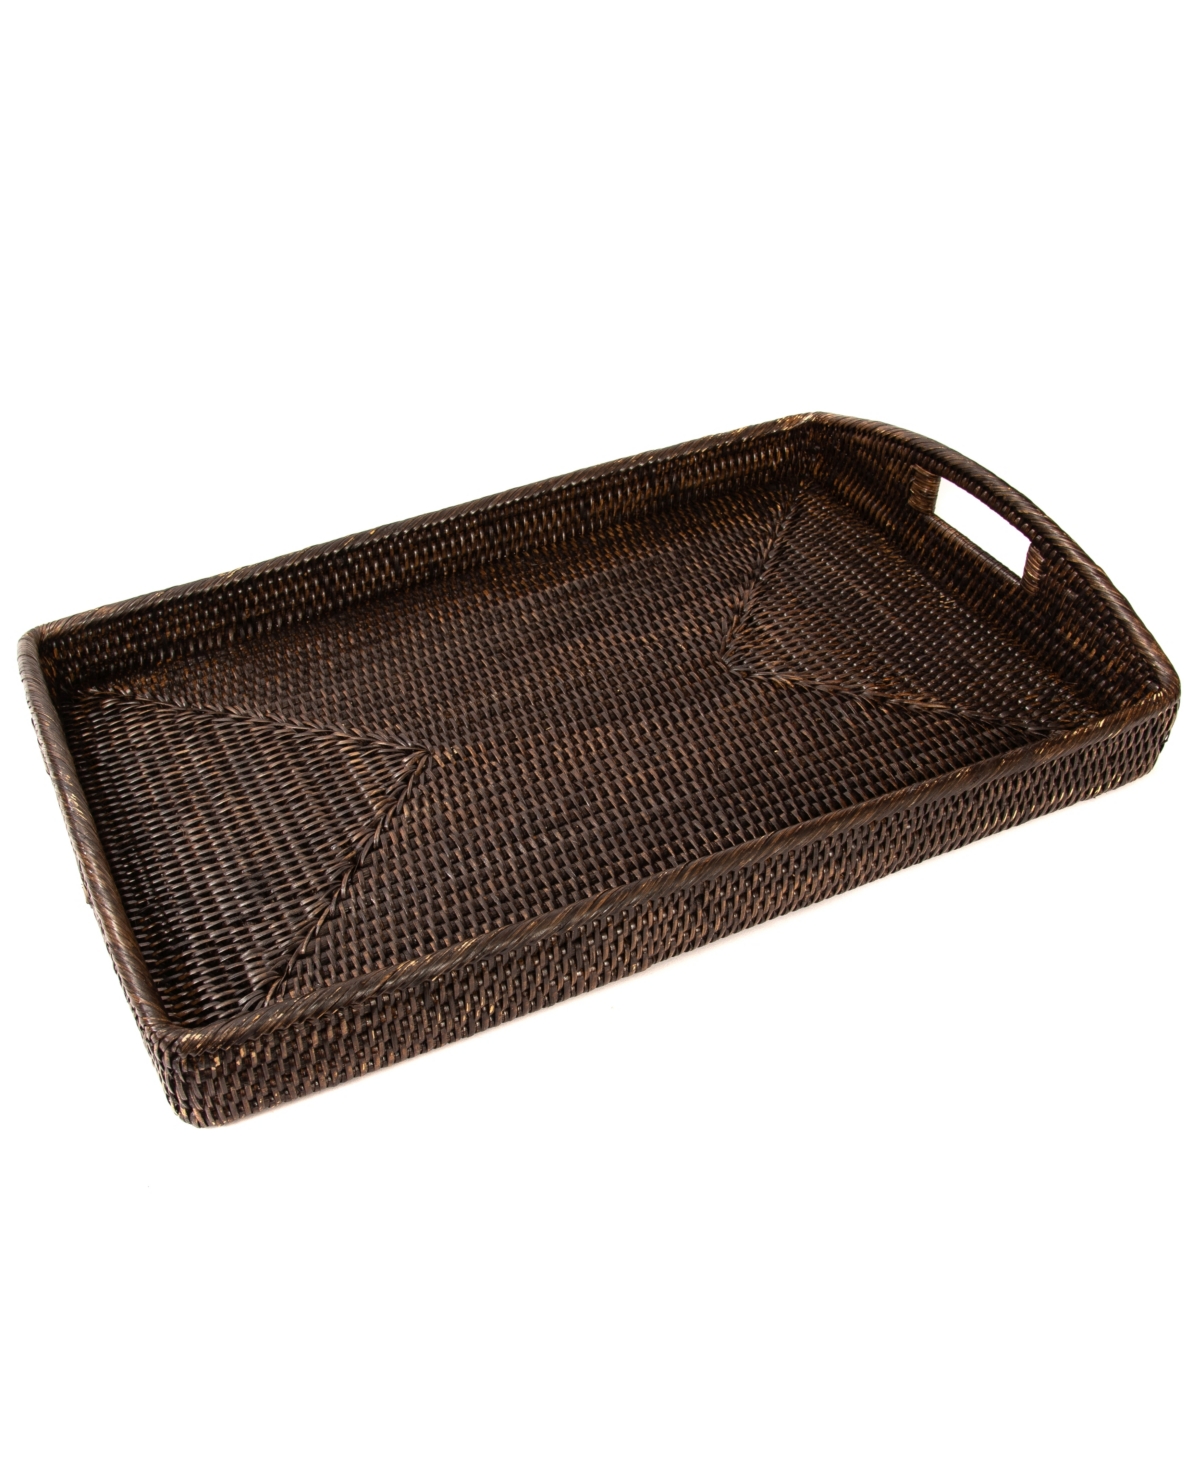 Artifacts Trading Company Artifacts Rattan Rectangular Serving Tray In Coffee Bean